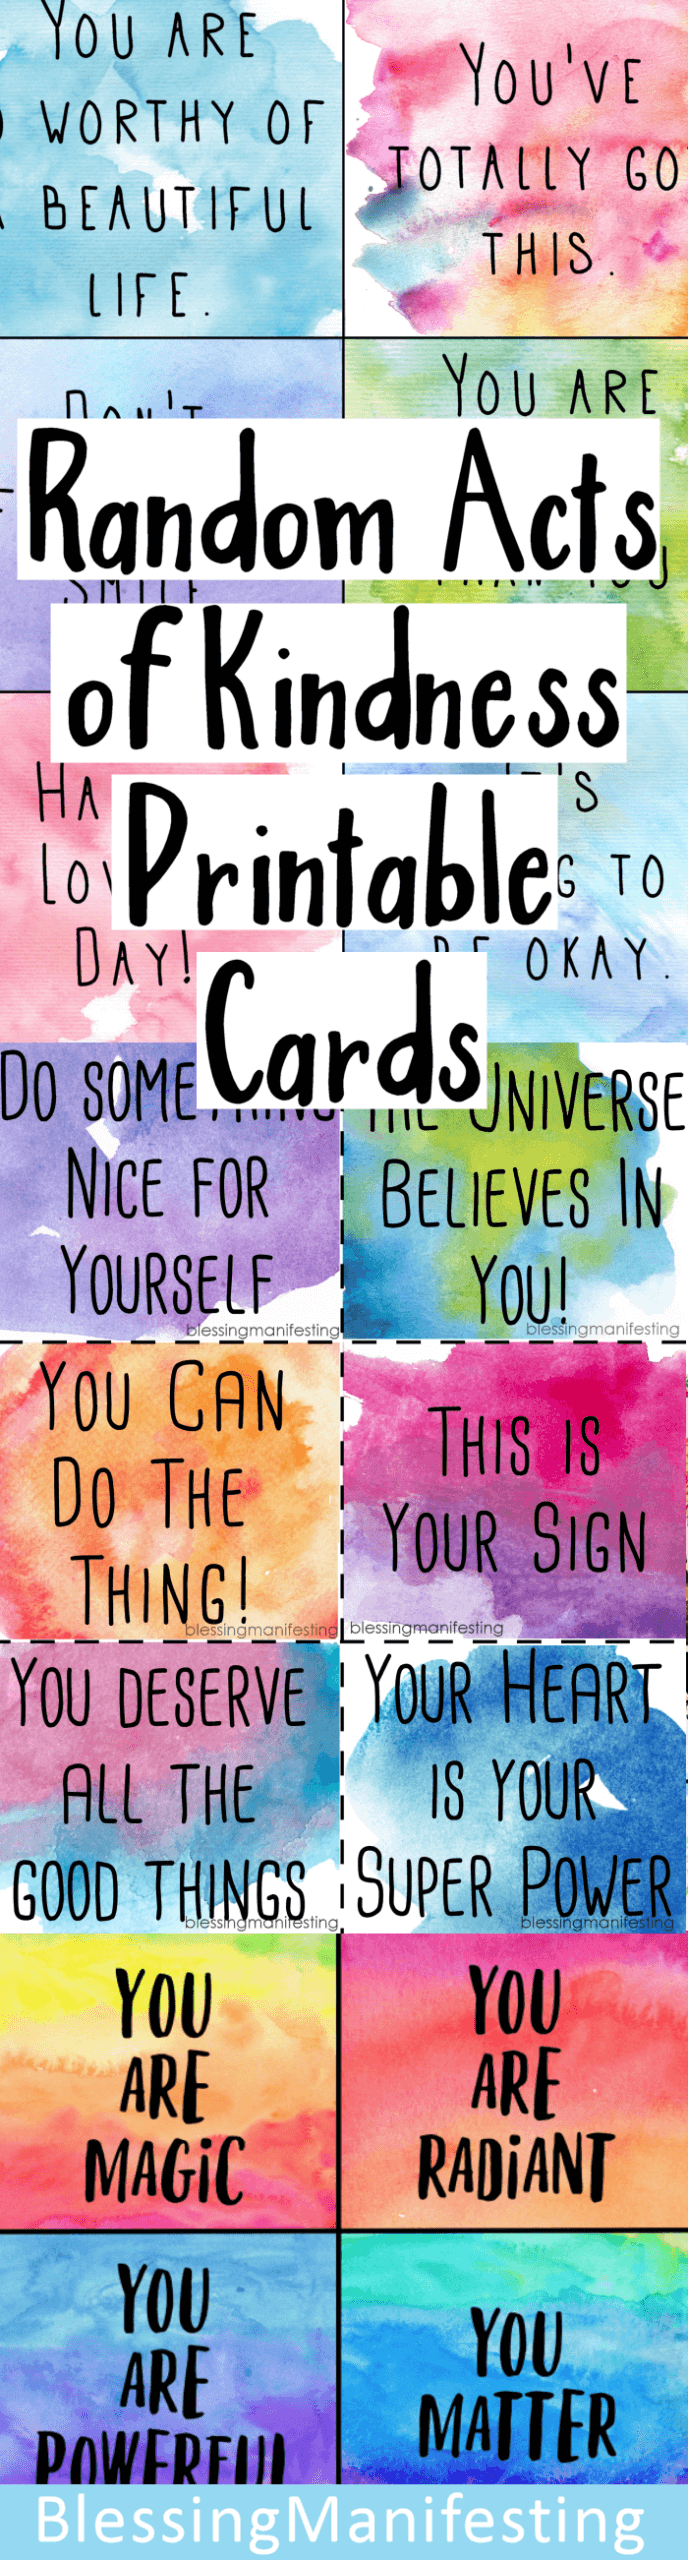 Random Acts Of Kindness Cards | Clip Art And Free Templates Inside Random Acts Of Kindness Cards Templates